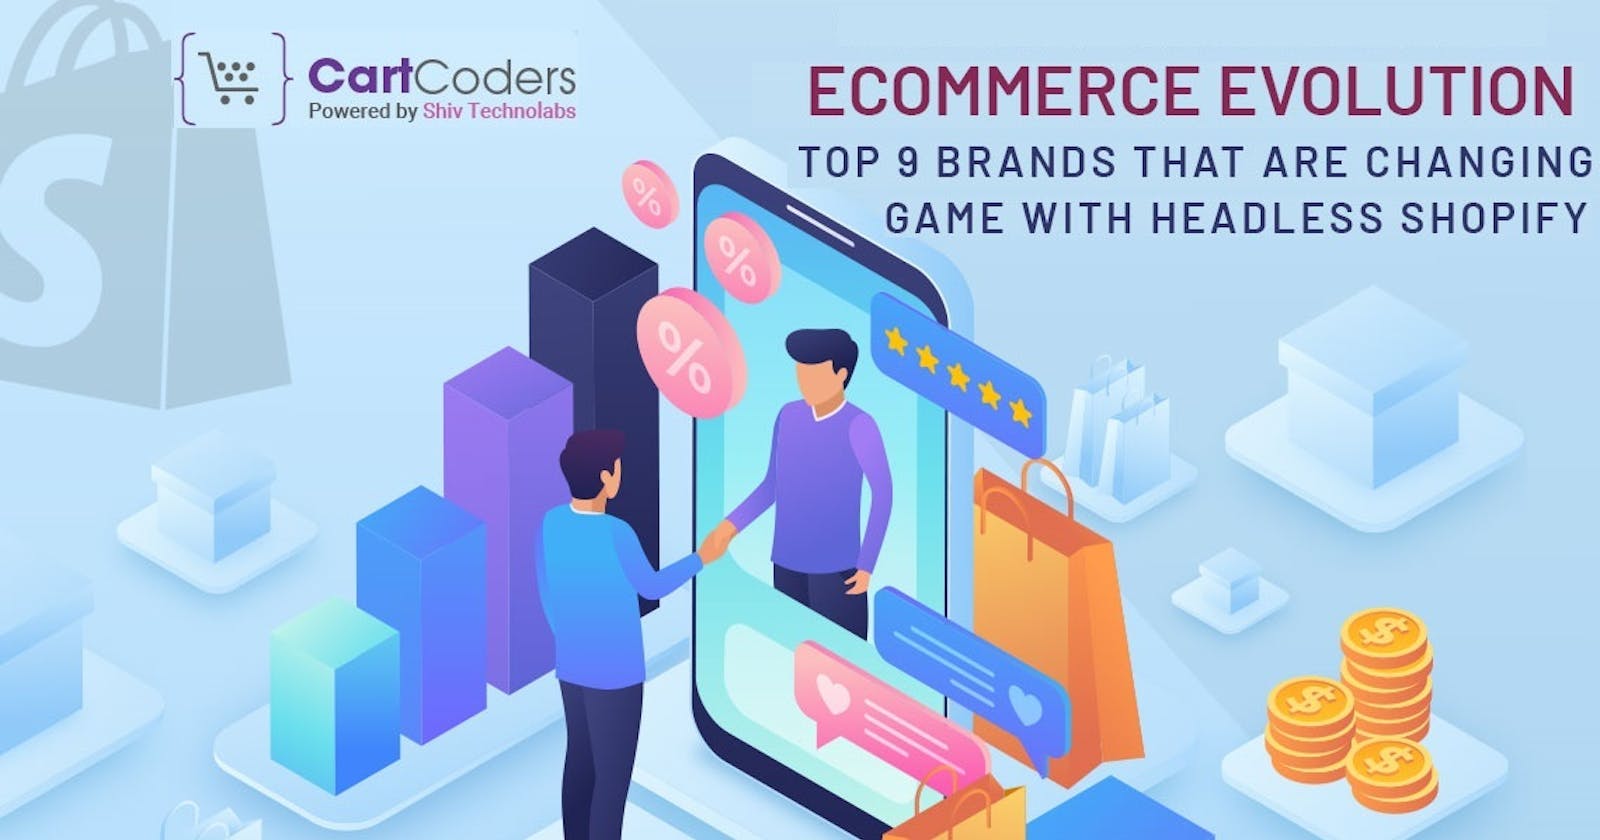 E-commerce Evolution: Top 9 Brands that are Changing the Game with Headless Shopify